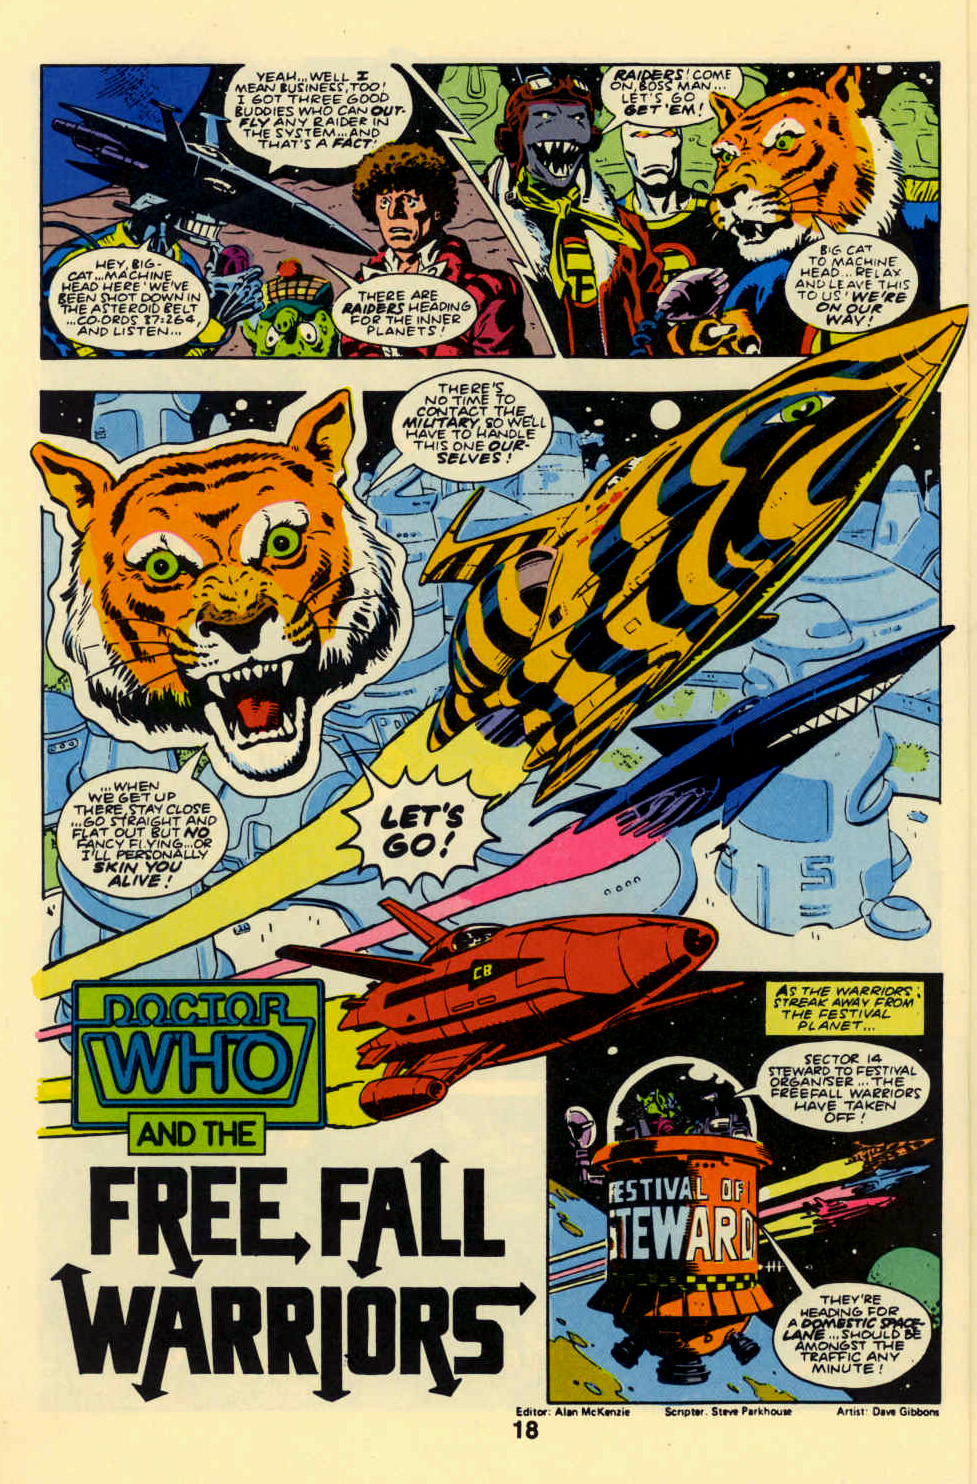 The Freefall Warriors appearance in colour in Marvel Comics US Doctor Who Comic #12, in 1984